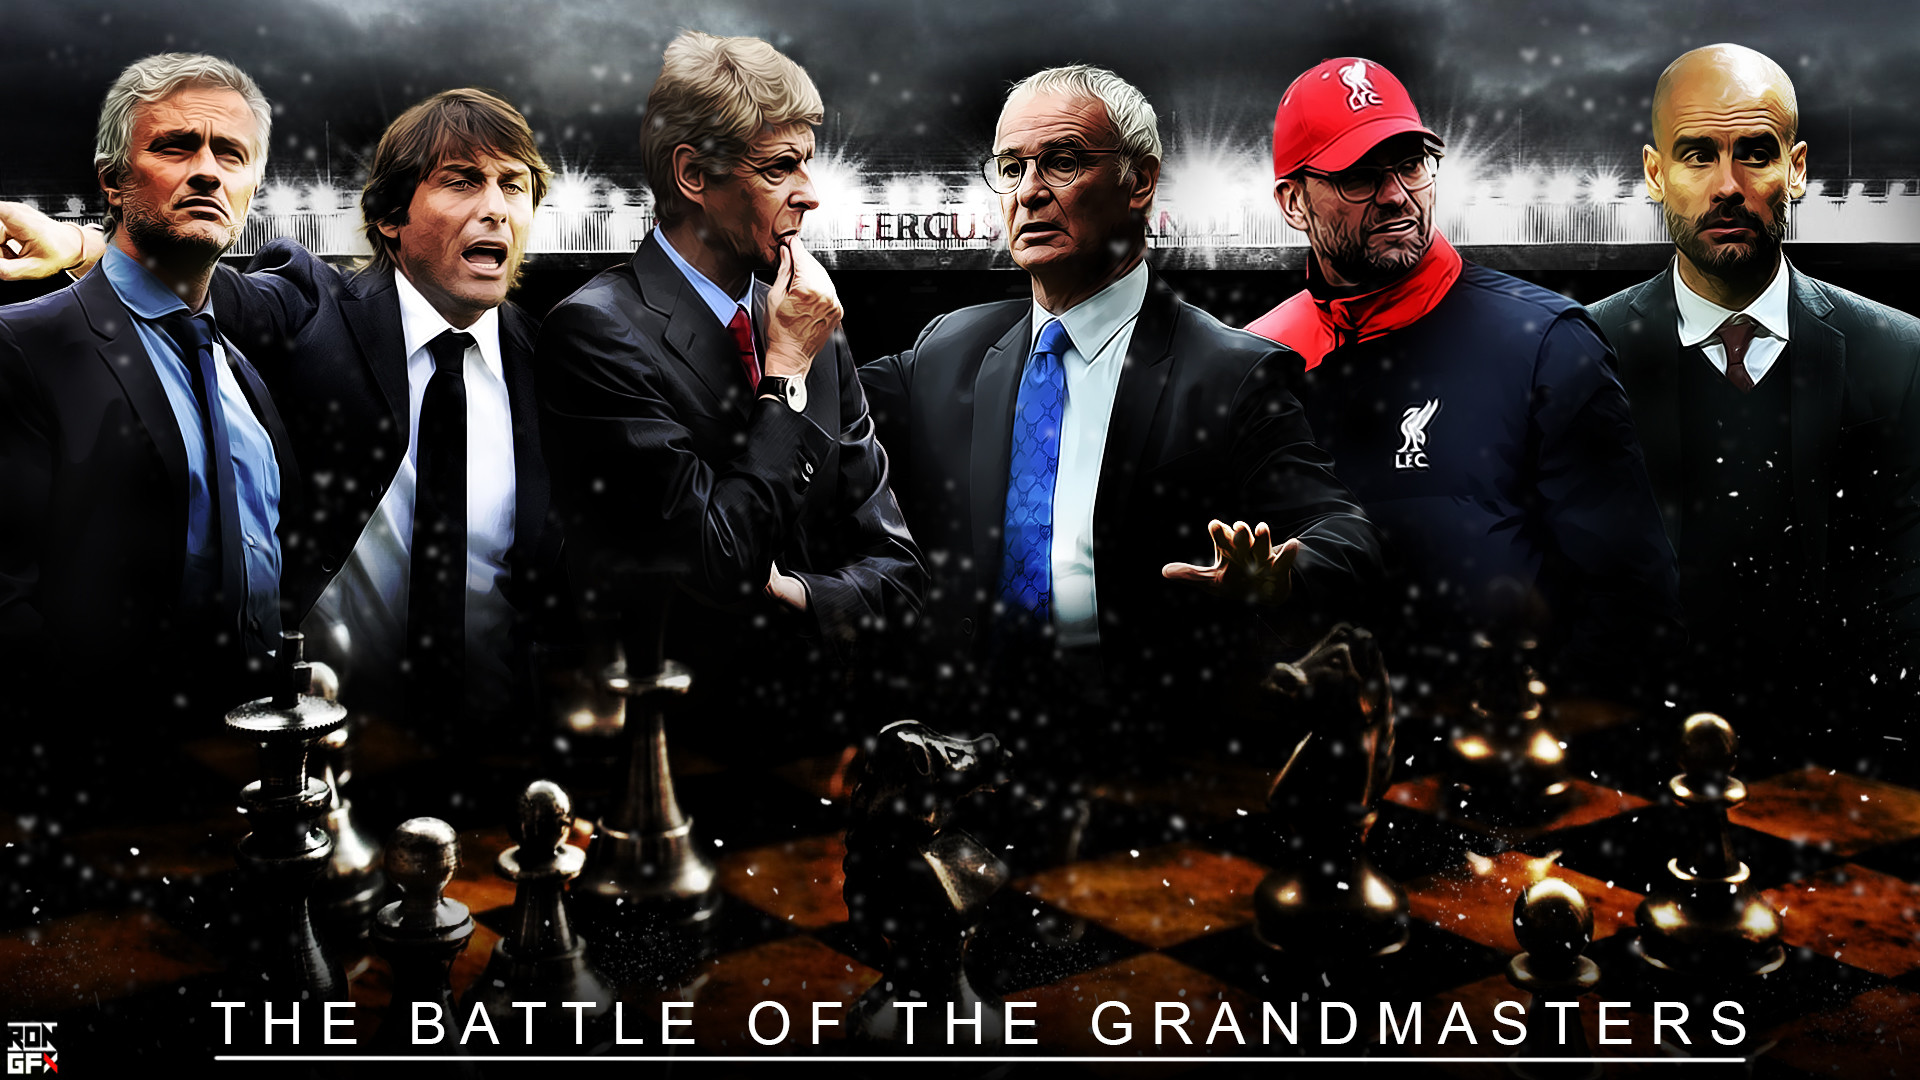 1920x1080 English Premier league managers wallpapers by Ropn1996 English Premier  league managers wallpapers by Ropn1996